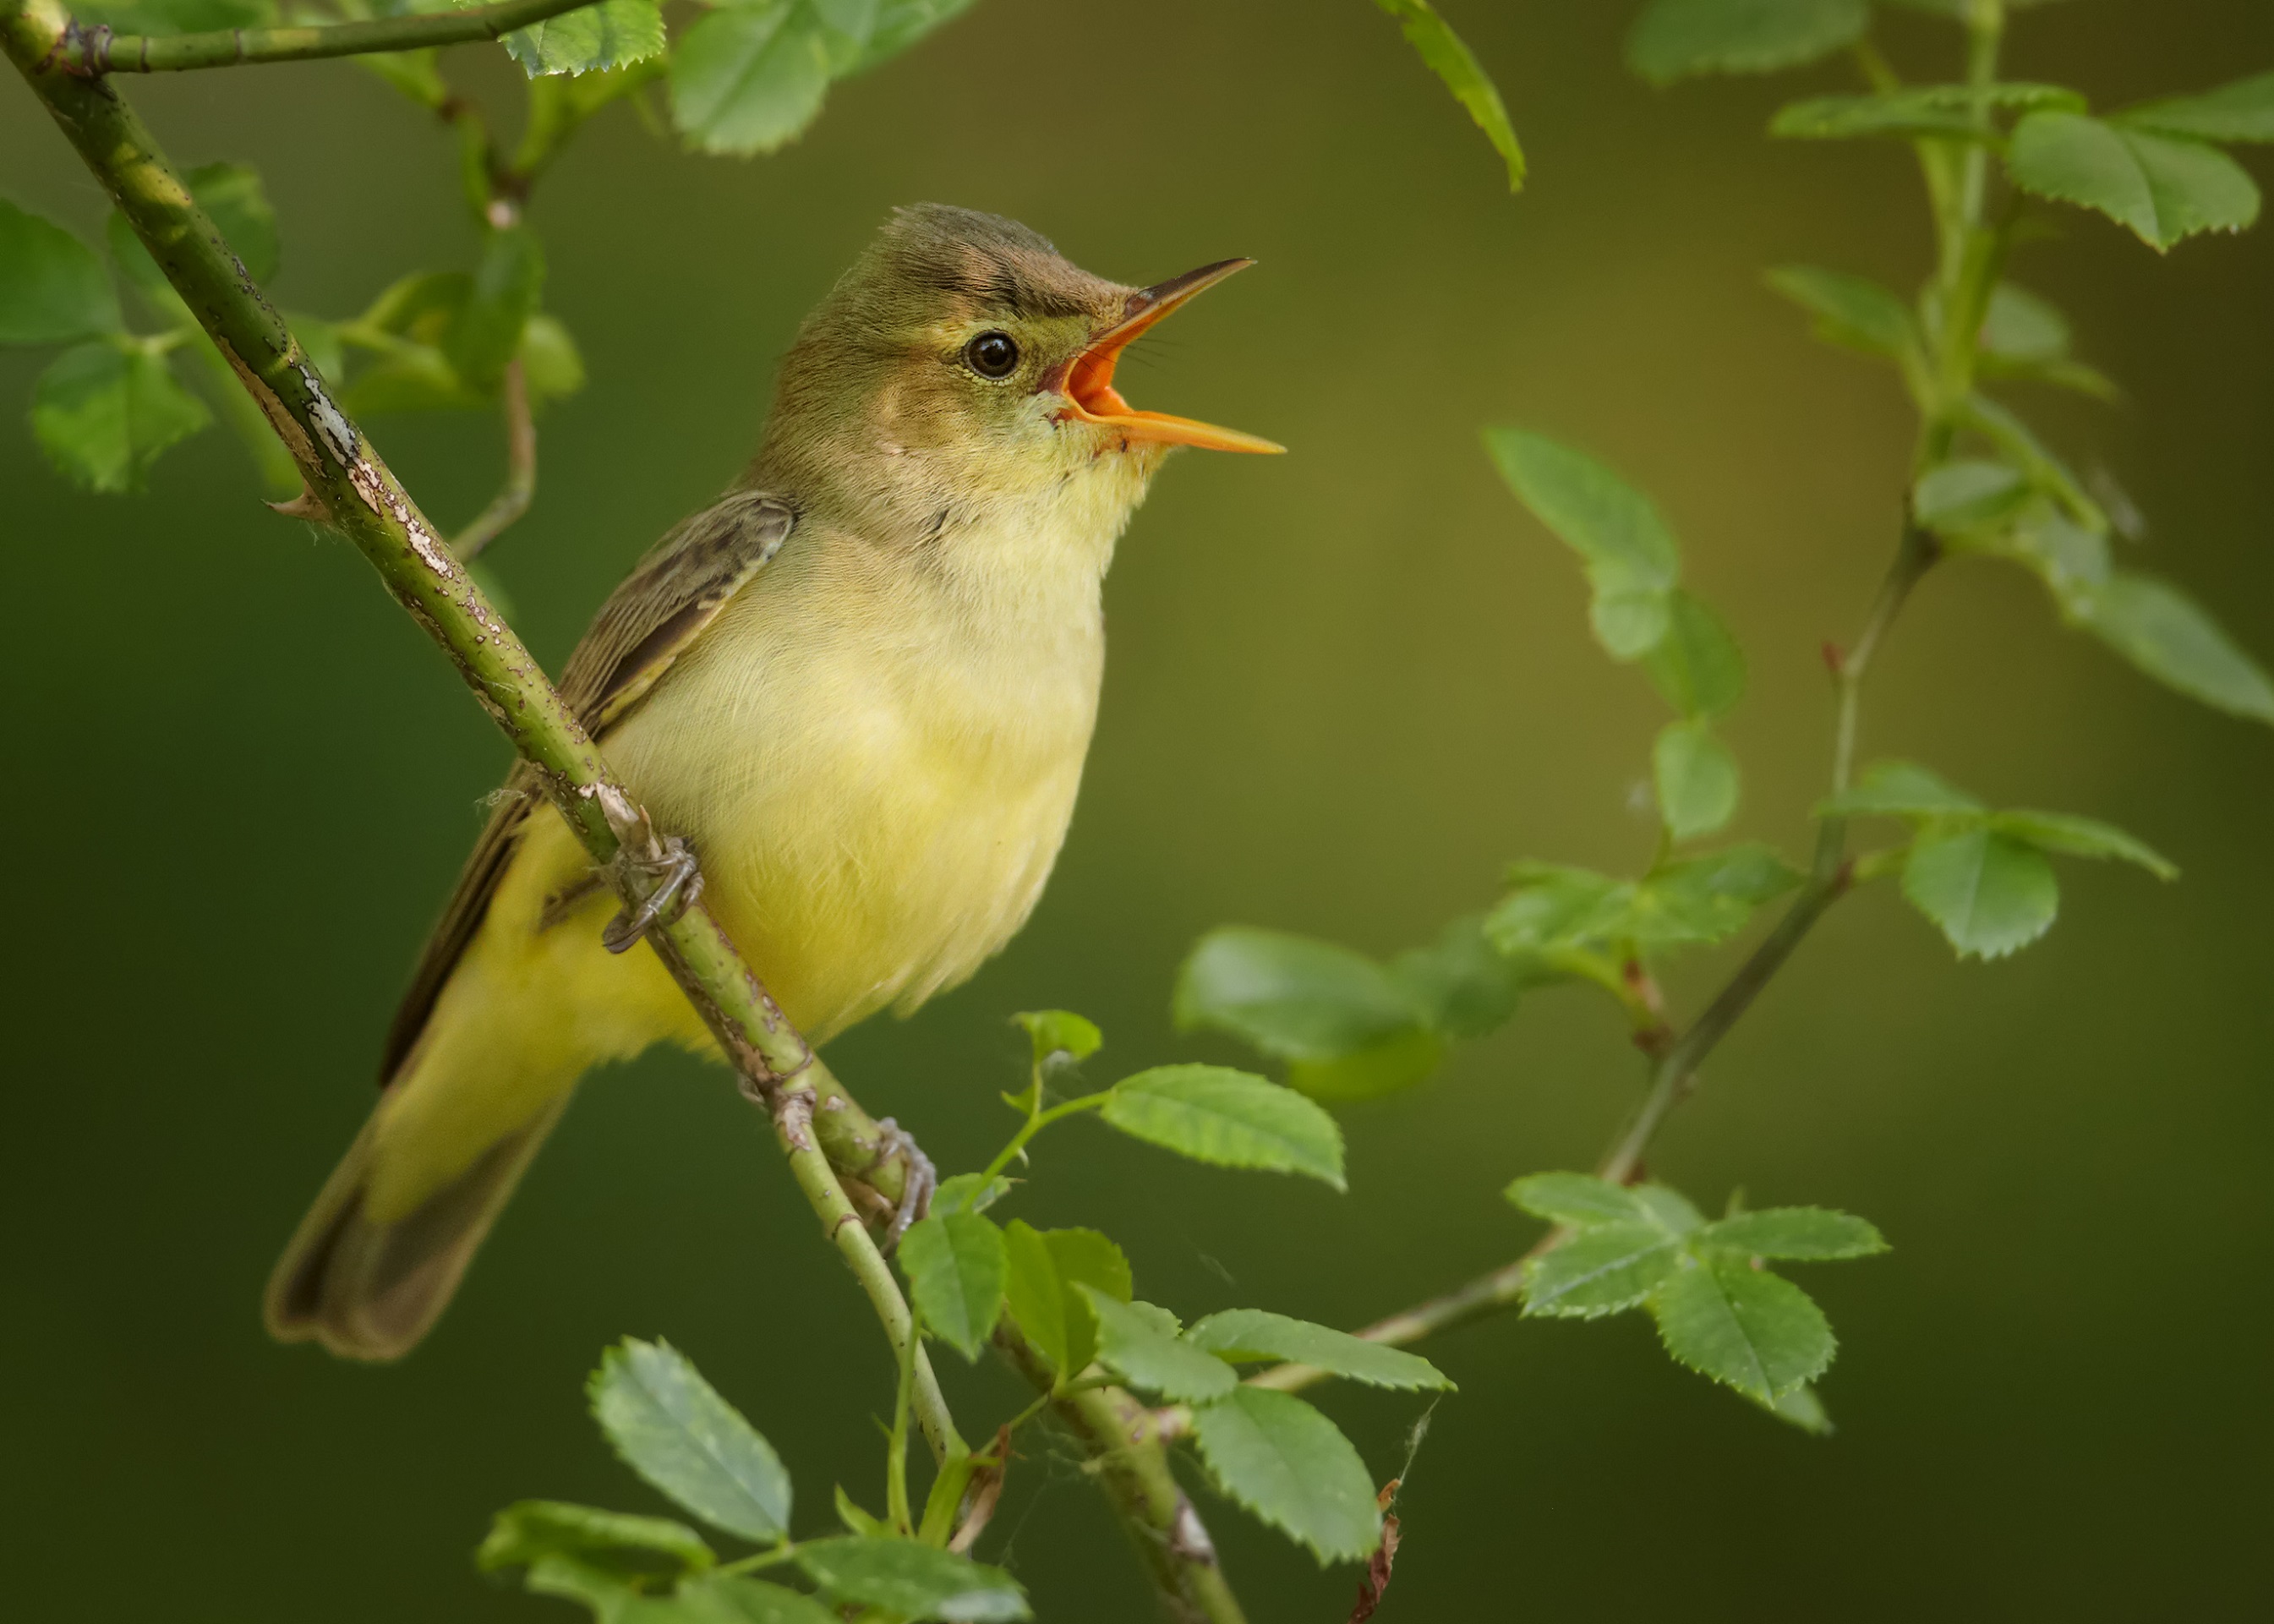 Spring themes. Singing songbird on a twig of rose against a blurry green background. Bird imitator Icterine Warbler, Hippolais icterina. Birding in the Czech Republic, Europe.